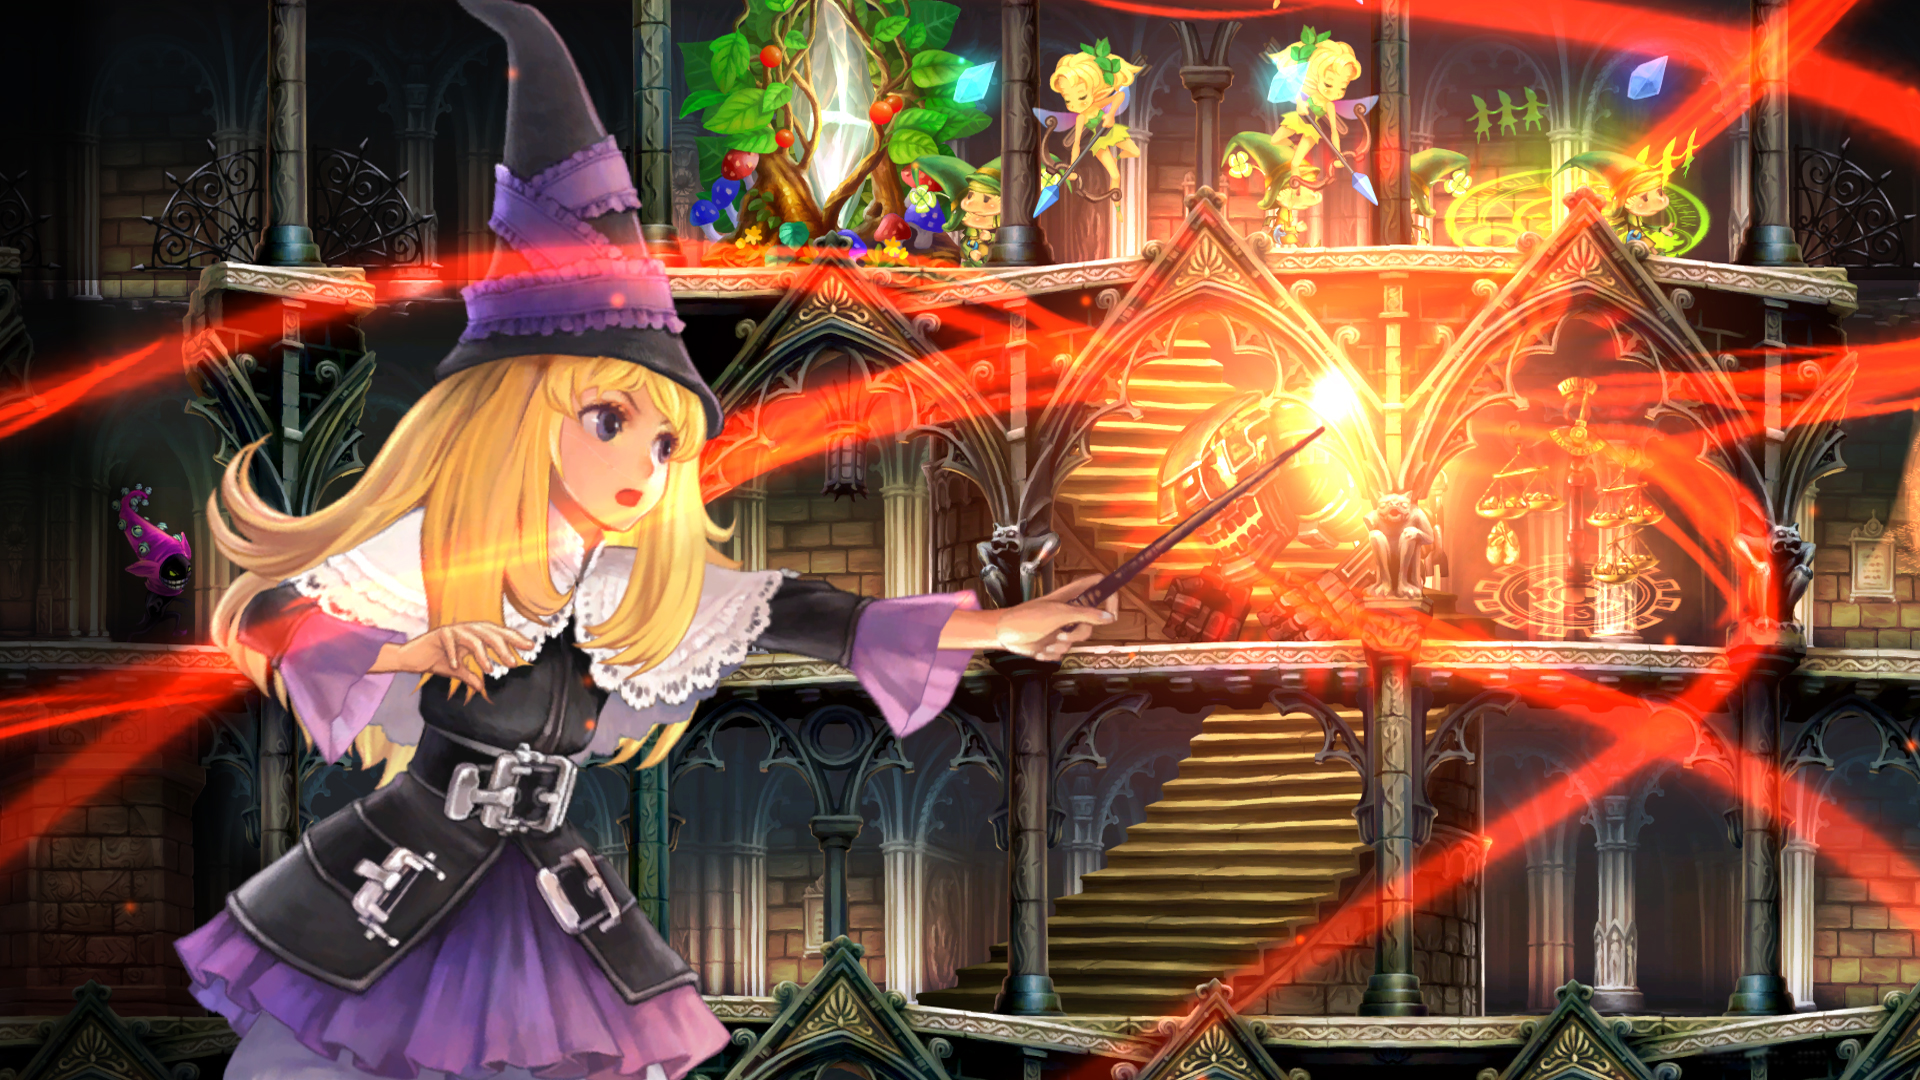 Lillet, a blonde wizard, stands to the left pointing her wand/magic towards enemies in the level. Helpful fairies are in the background.